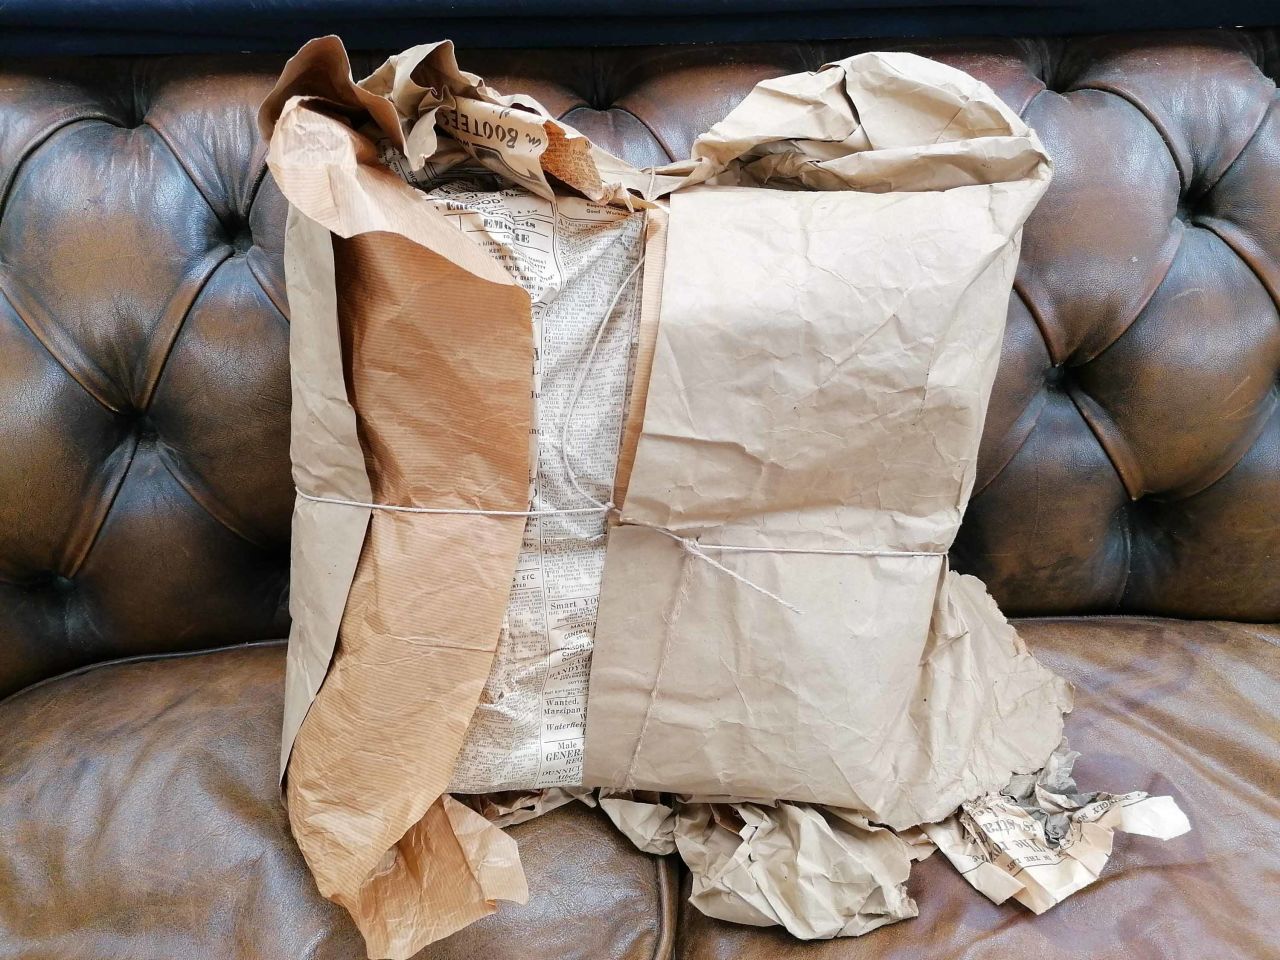 The uniform was in a package that hadn't been opened for 70 years.